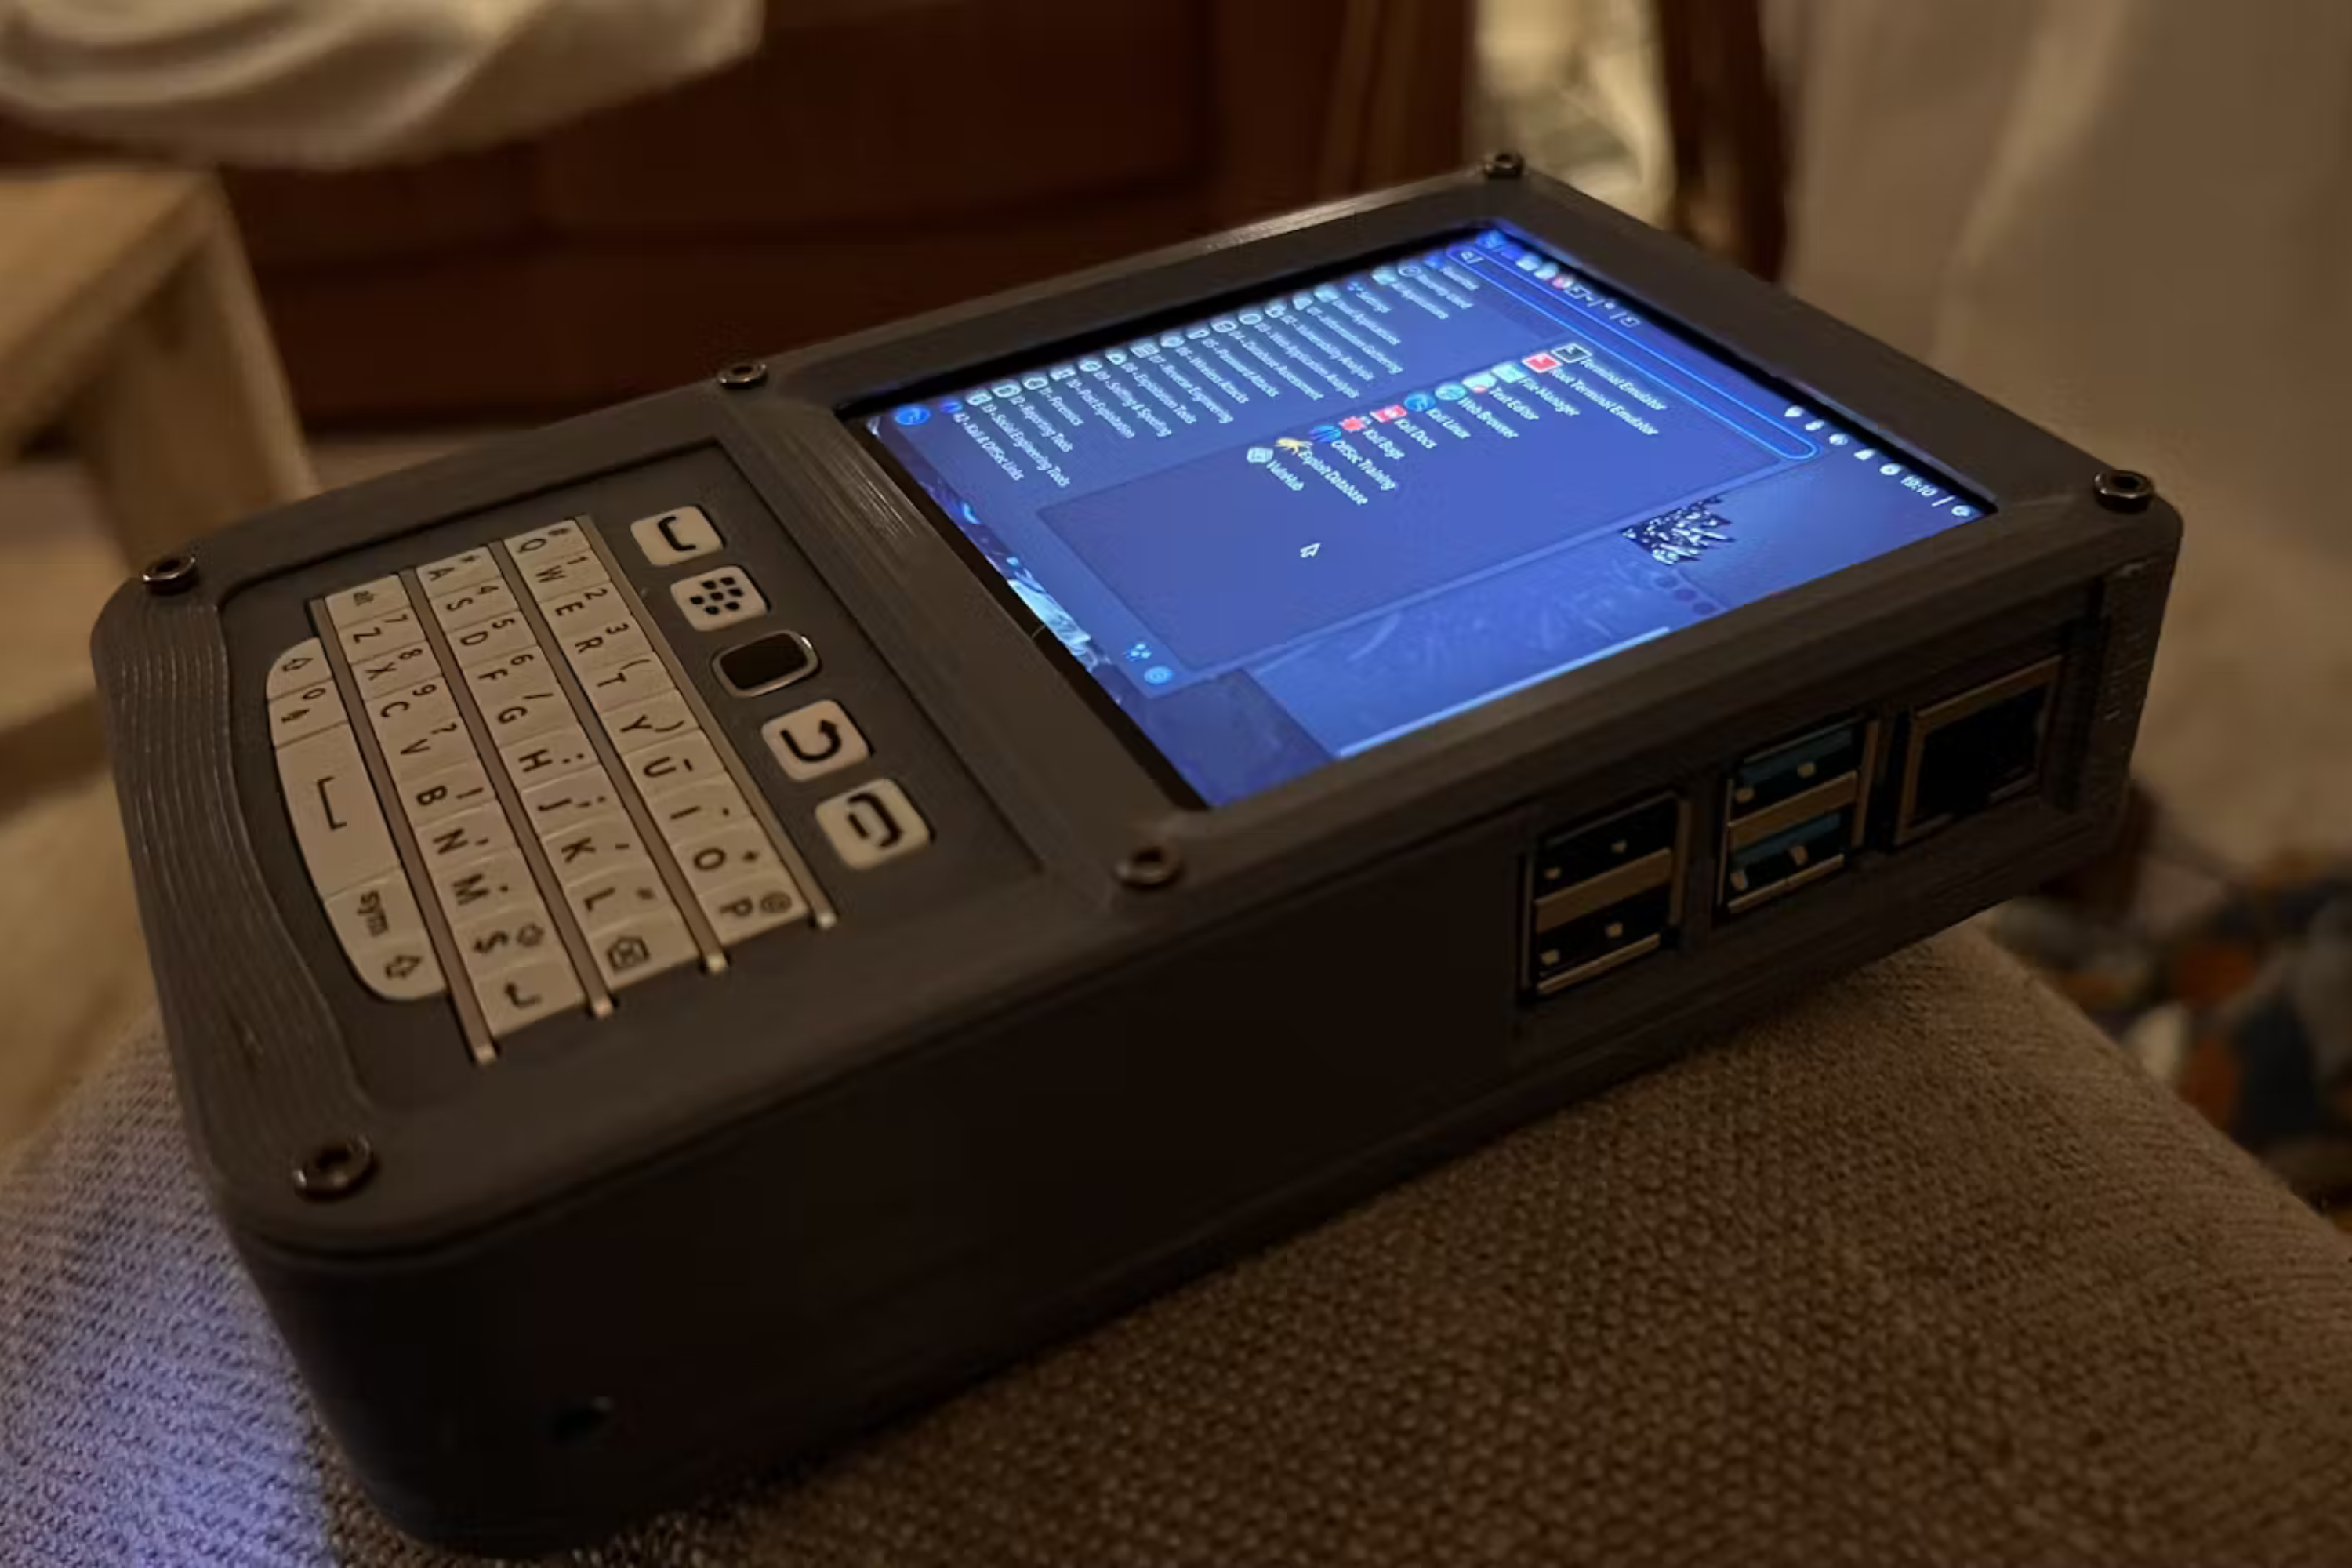 This Pi-powered pocket PC features a Blackberry keyboard and trackpad